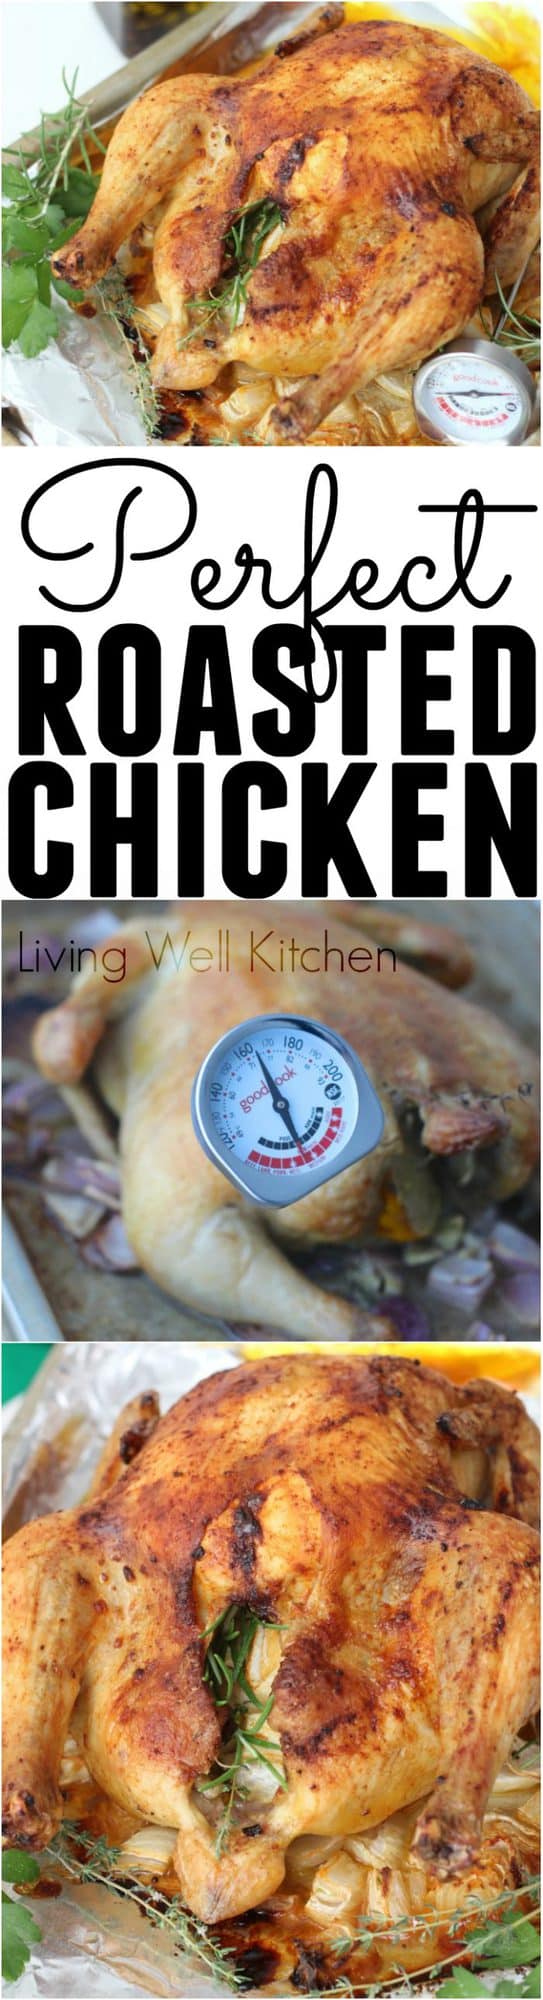 Perfect Roasted Chicken | Living Well Kitchen